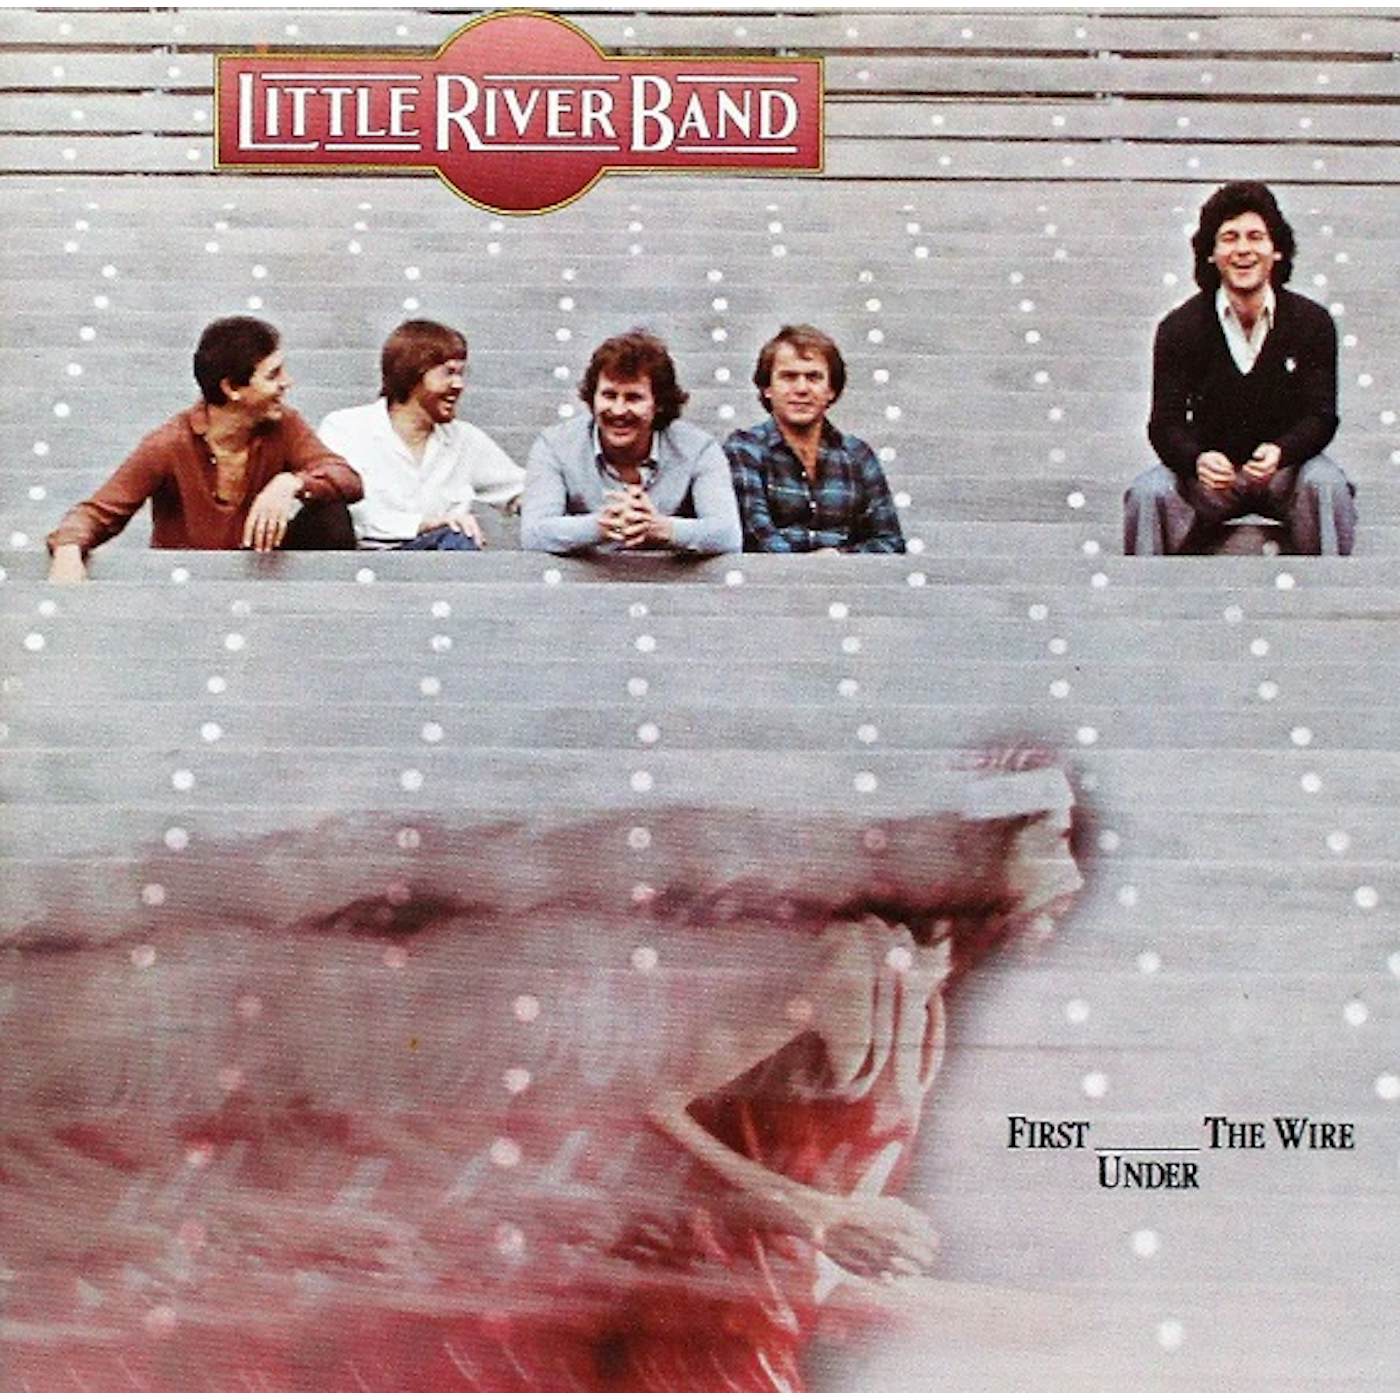 Little River Band FIRST UNDER THE WIRE CD